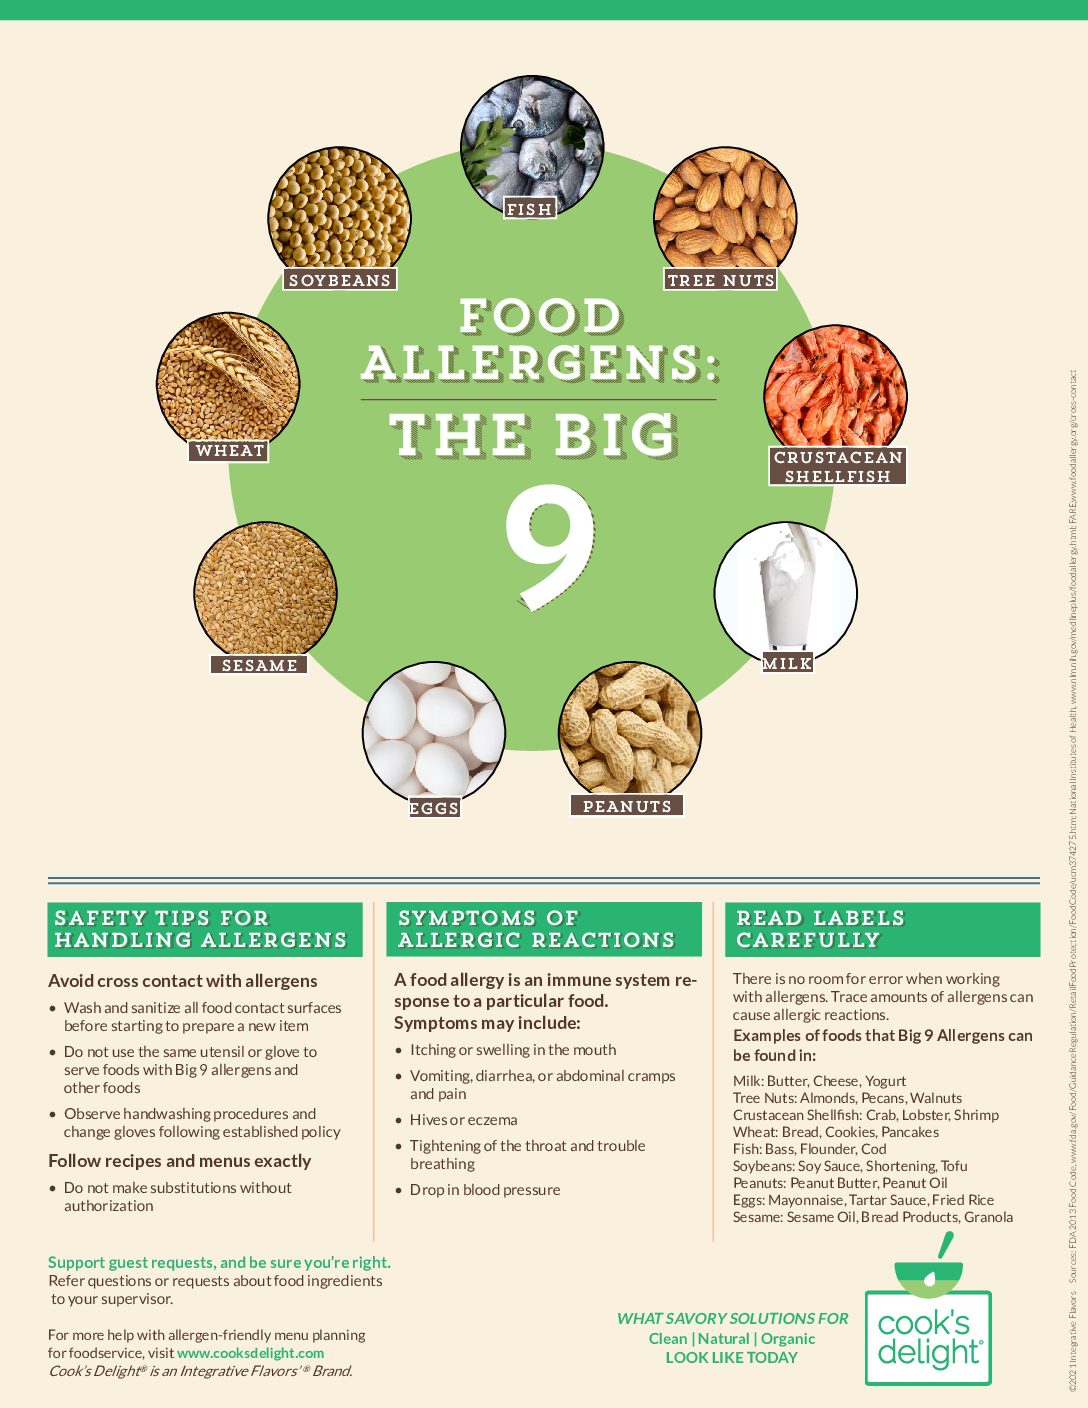 Big 9 Allergens Updating Your Allergen Plan To Comply With Faster Act